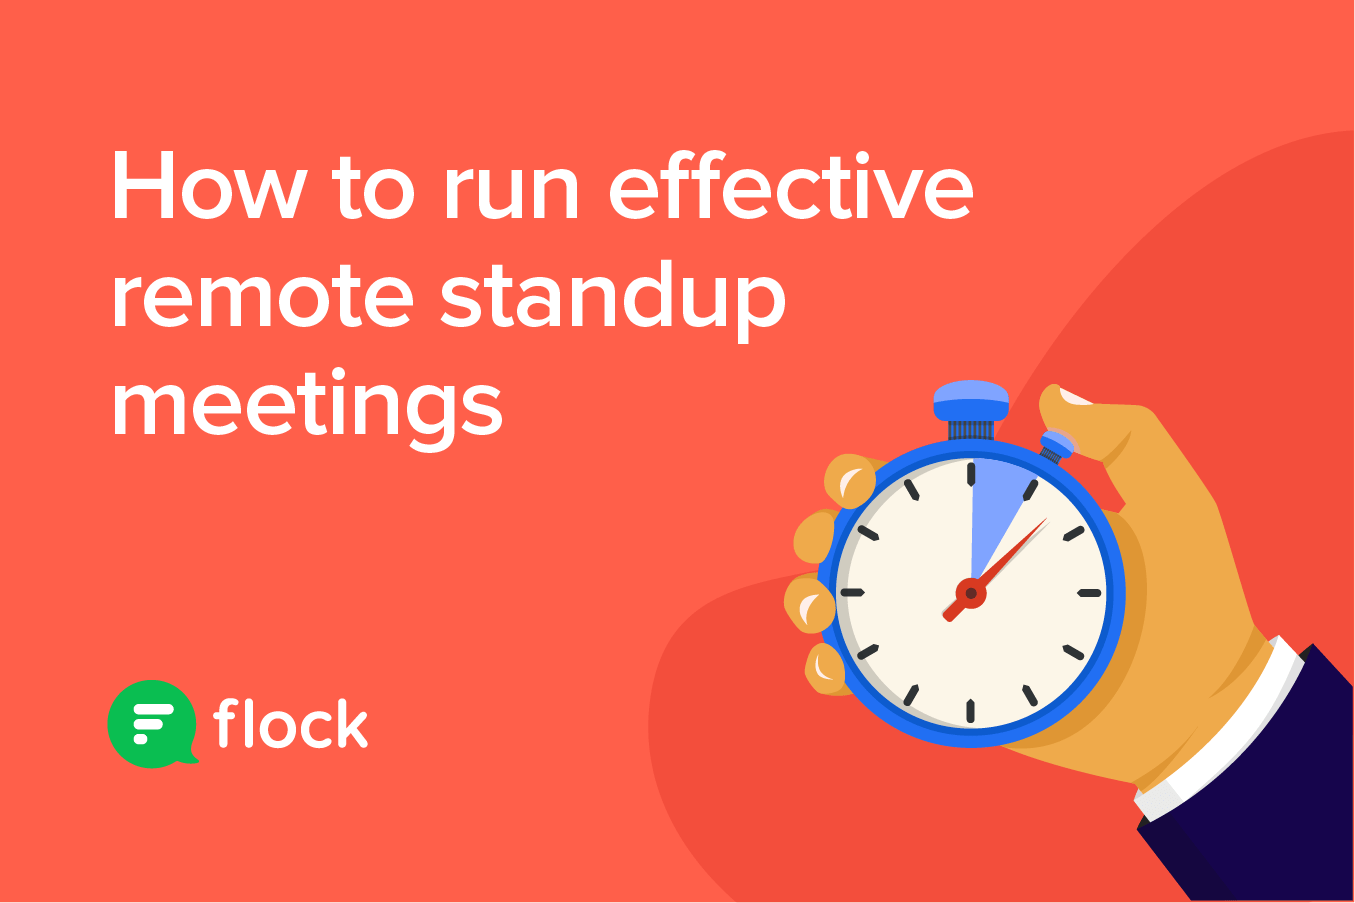 How to run effective remote standups